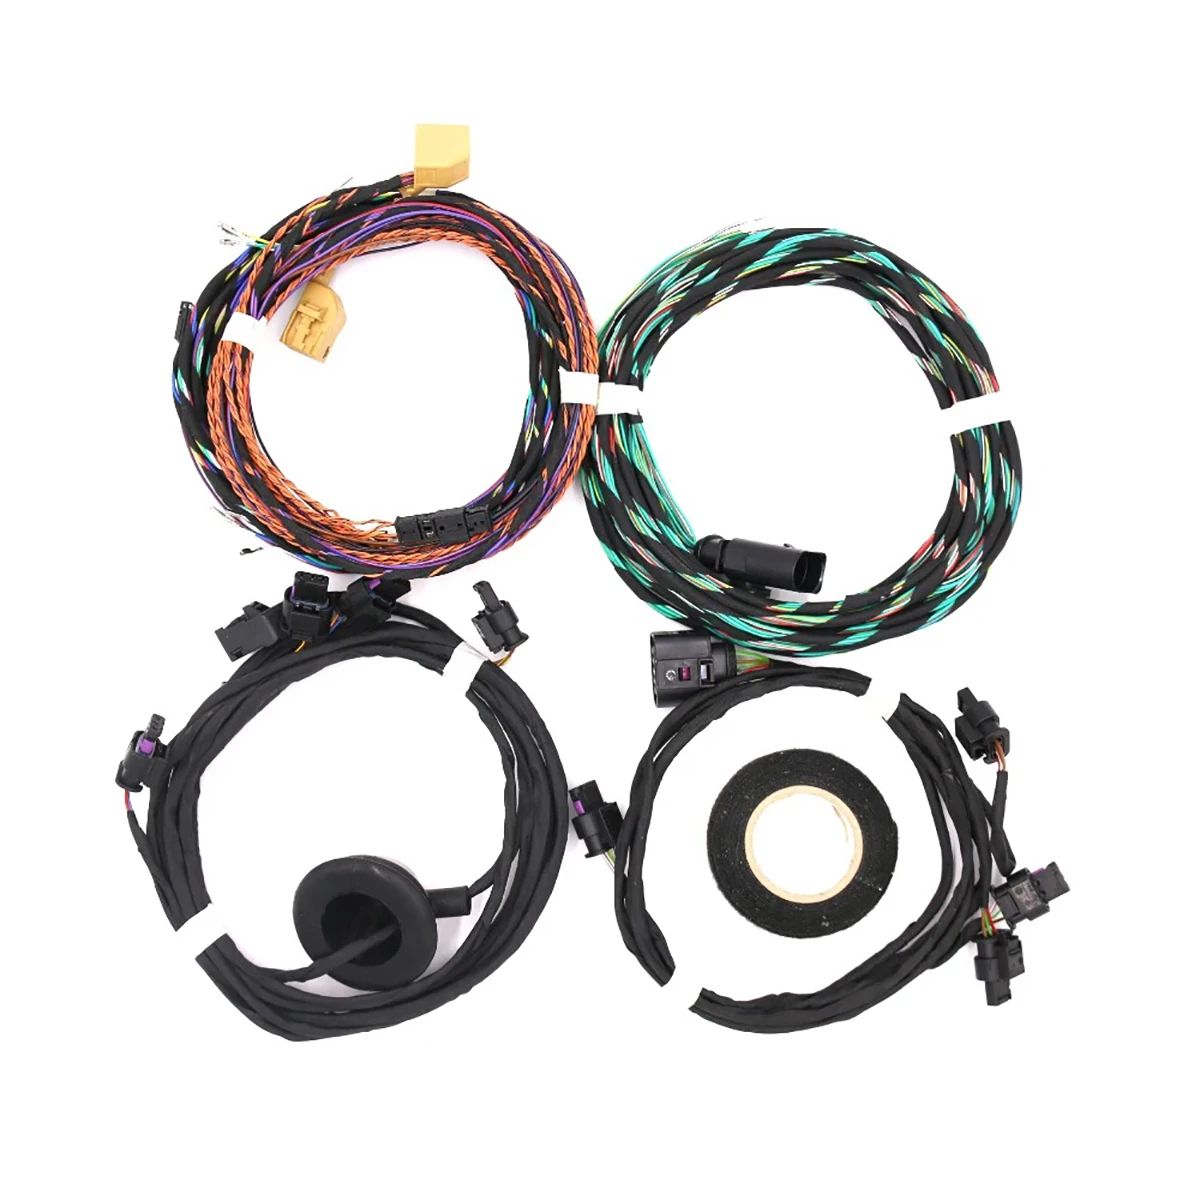 PARKING FRONT AND REAR 8K PDC OPS INSTALL HARNESS CABLE WIRE KIT FOR VW PASSAT B7 CC TIGUAN 5N